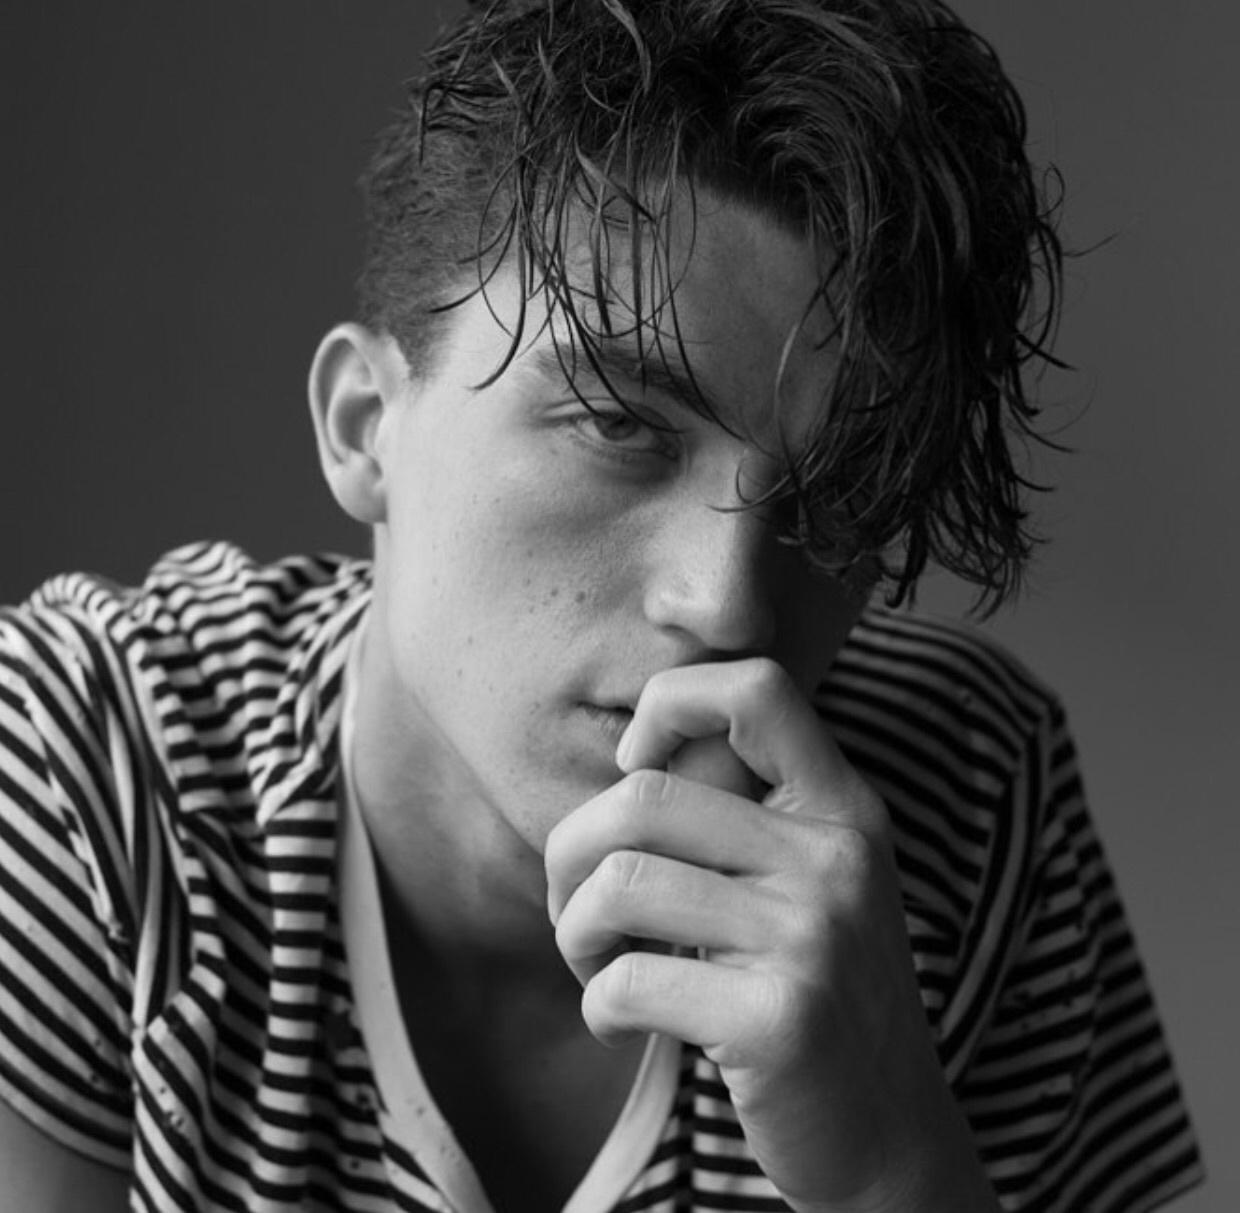 image about paul klein. See more about paul